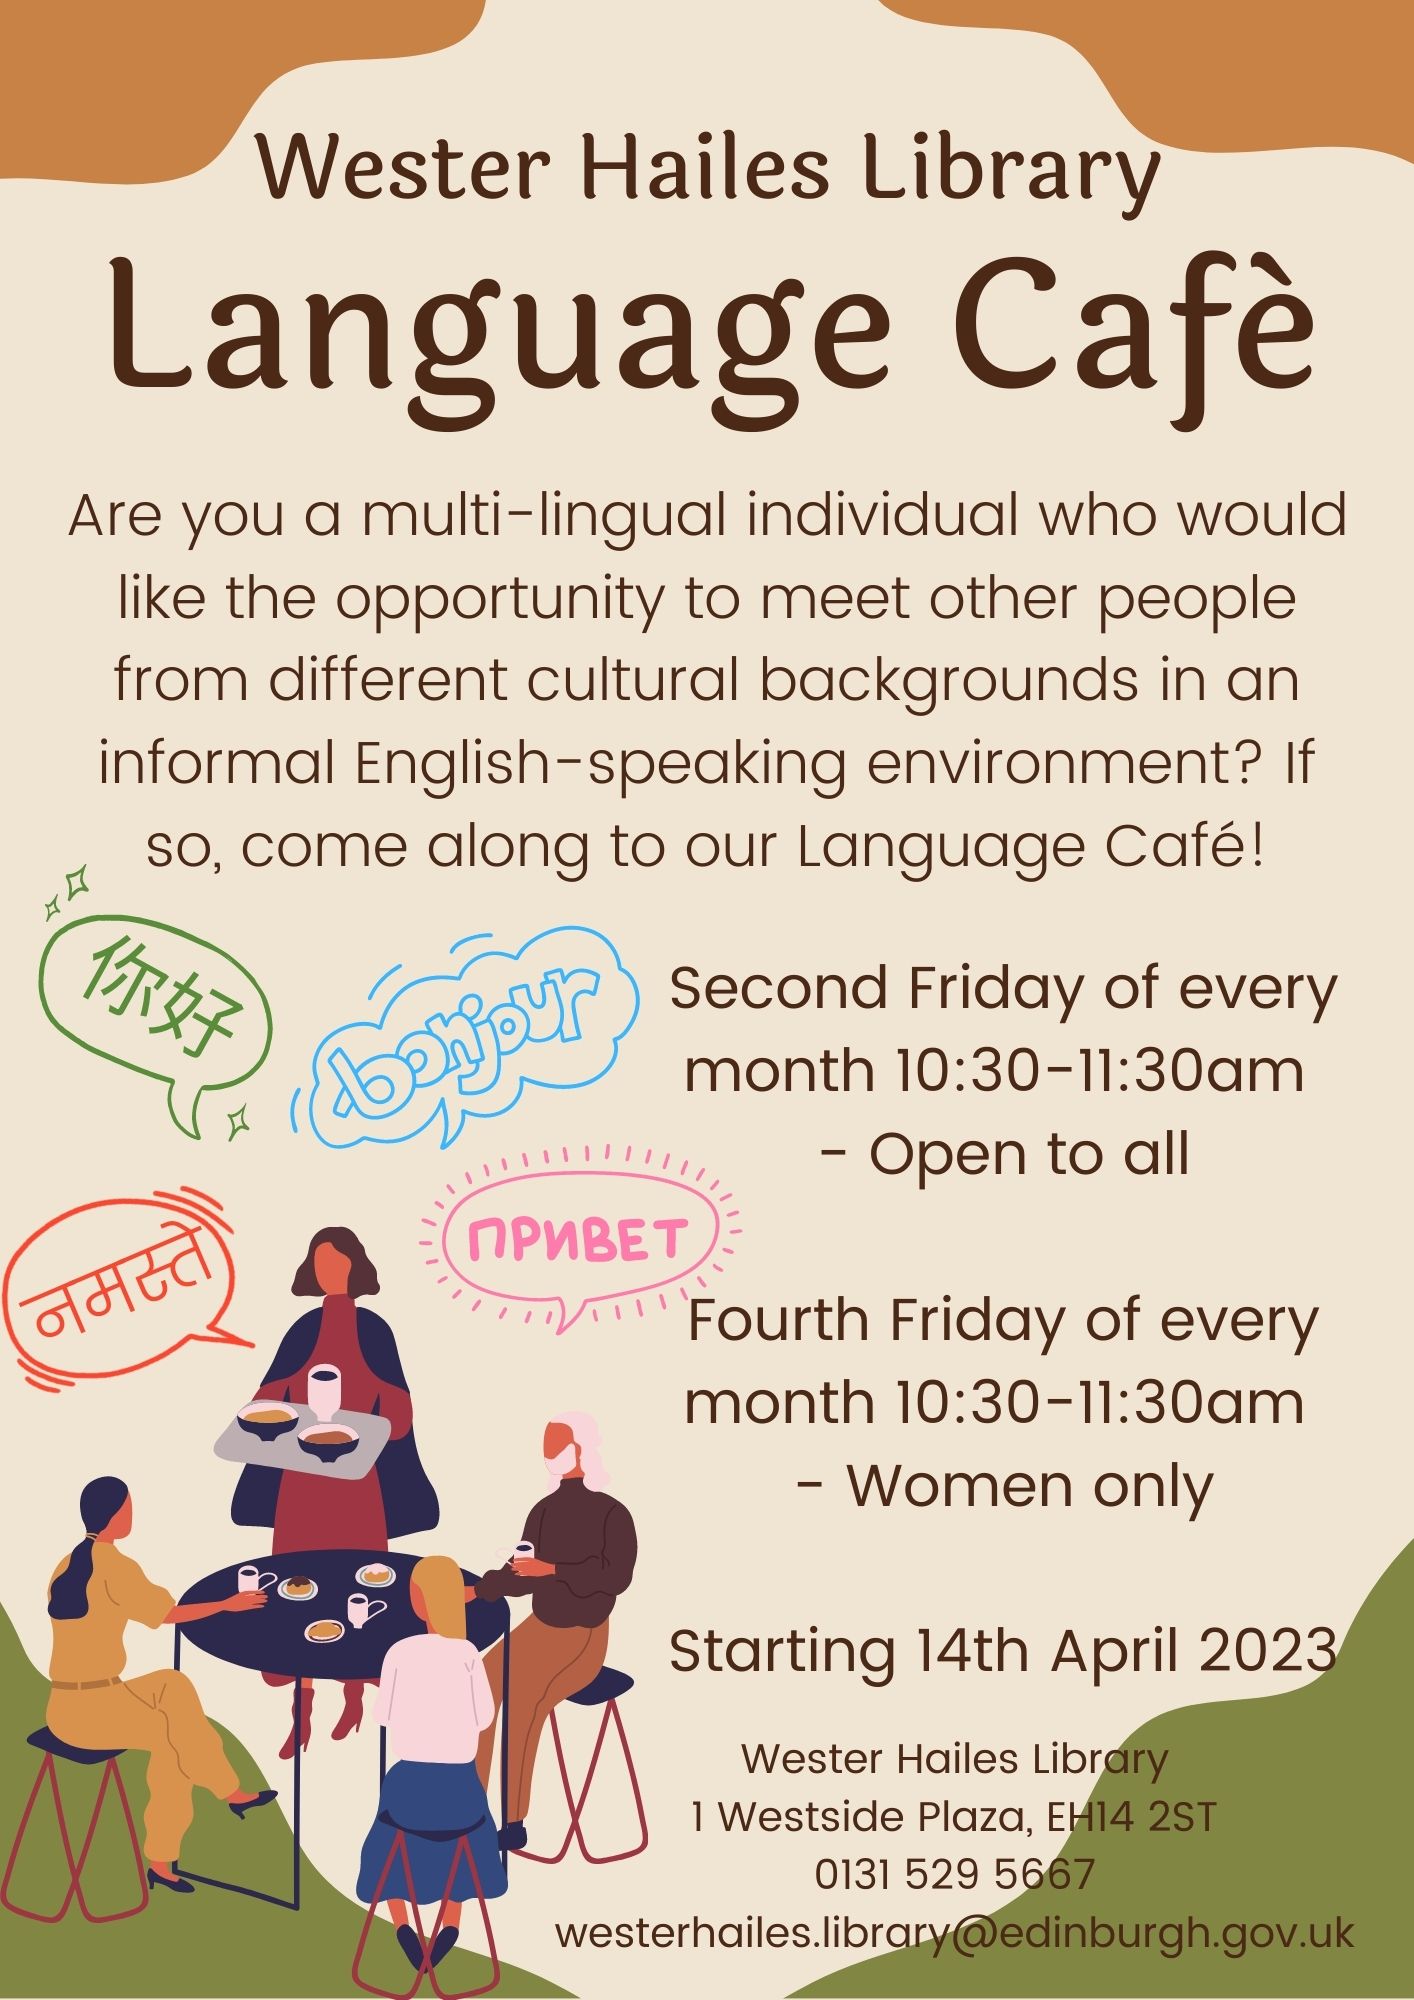 Wester Hailes Library Language Cafe